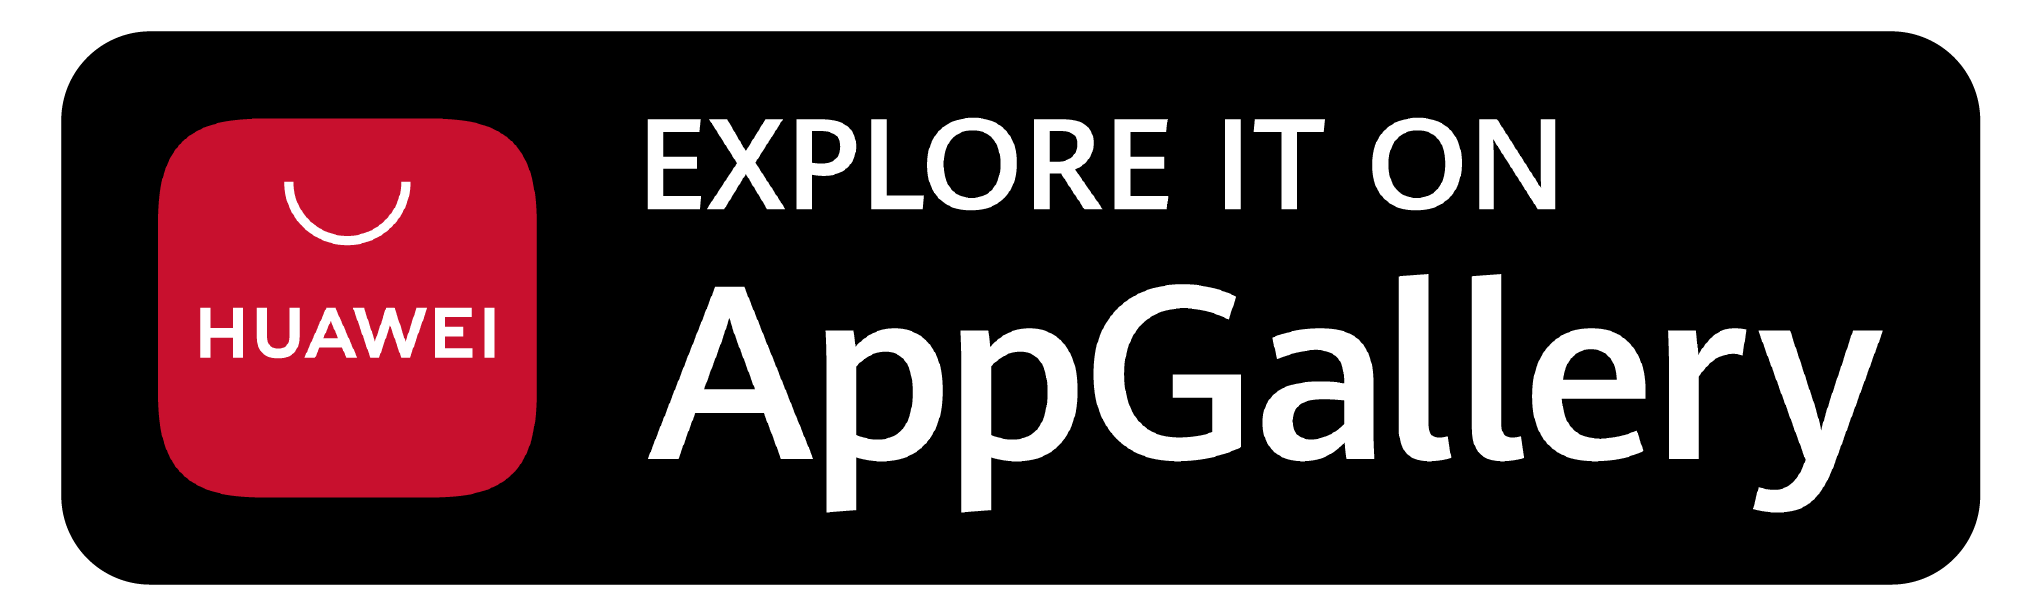 send money on zero fee download now huawei App from AppGallery